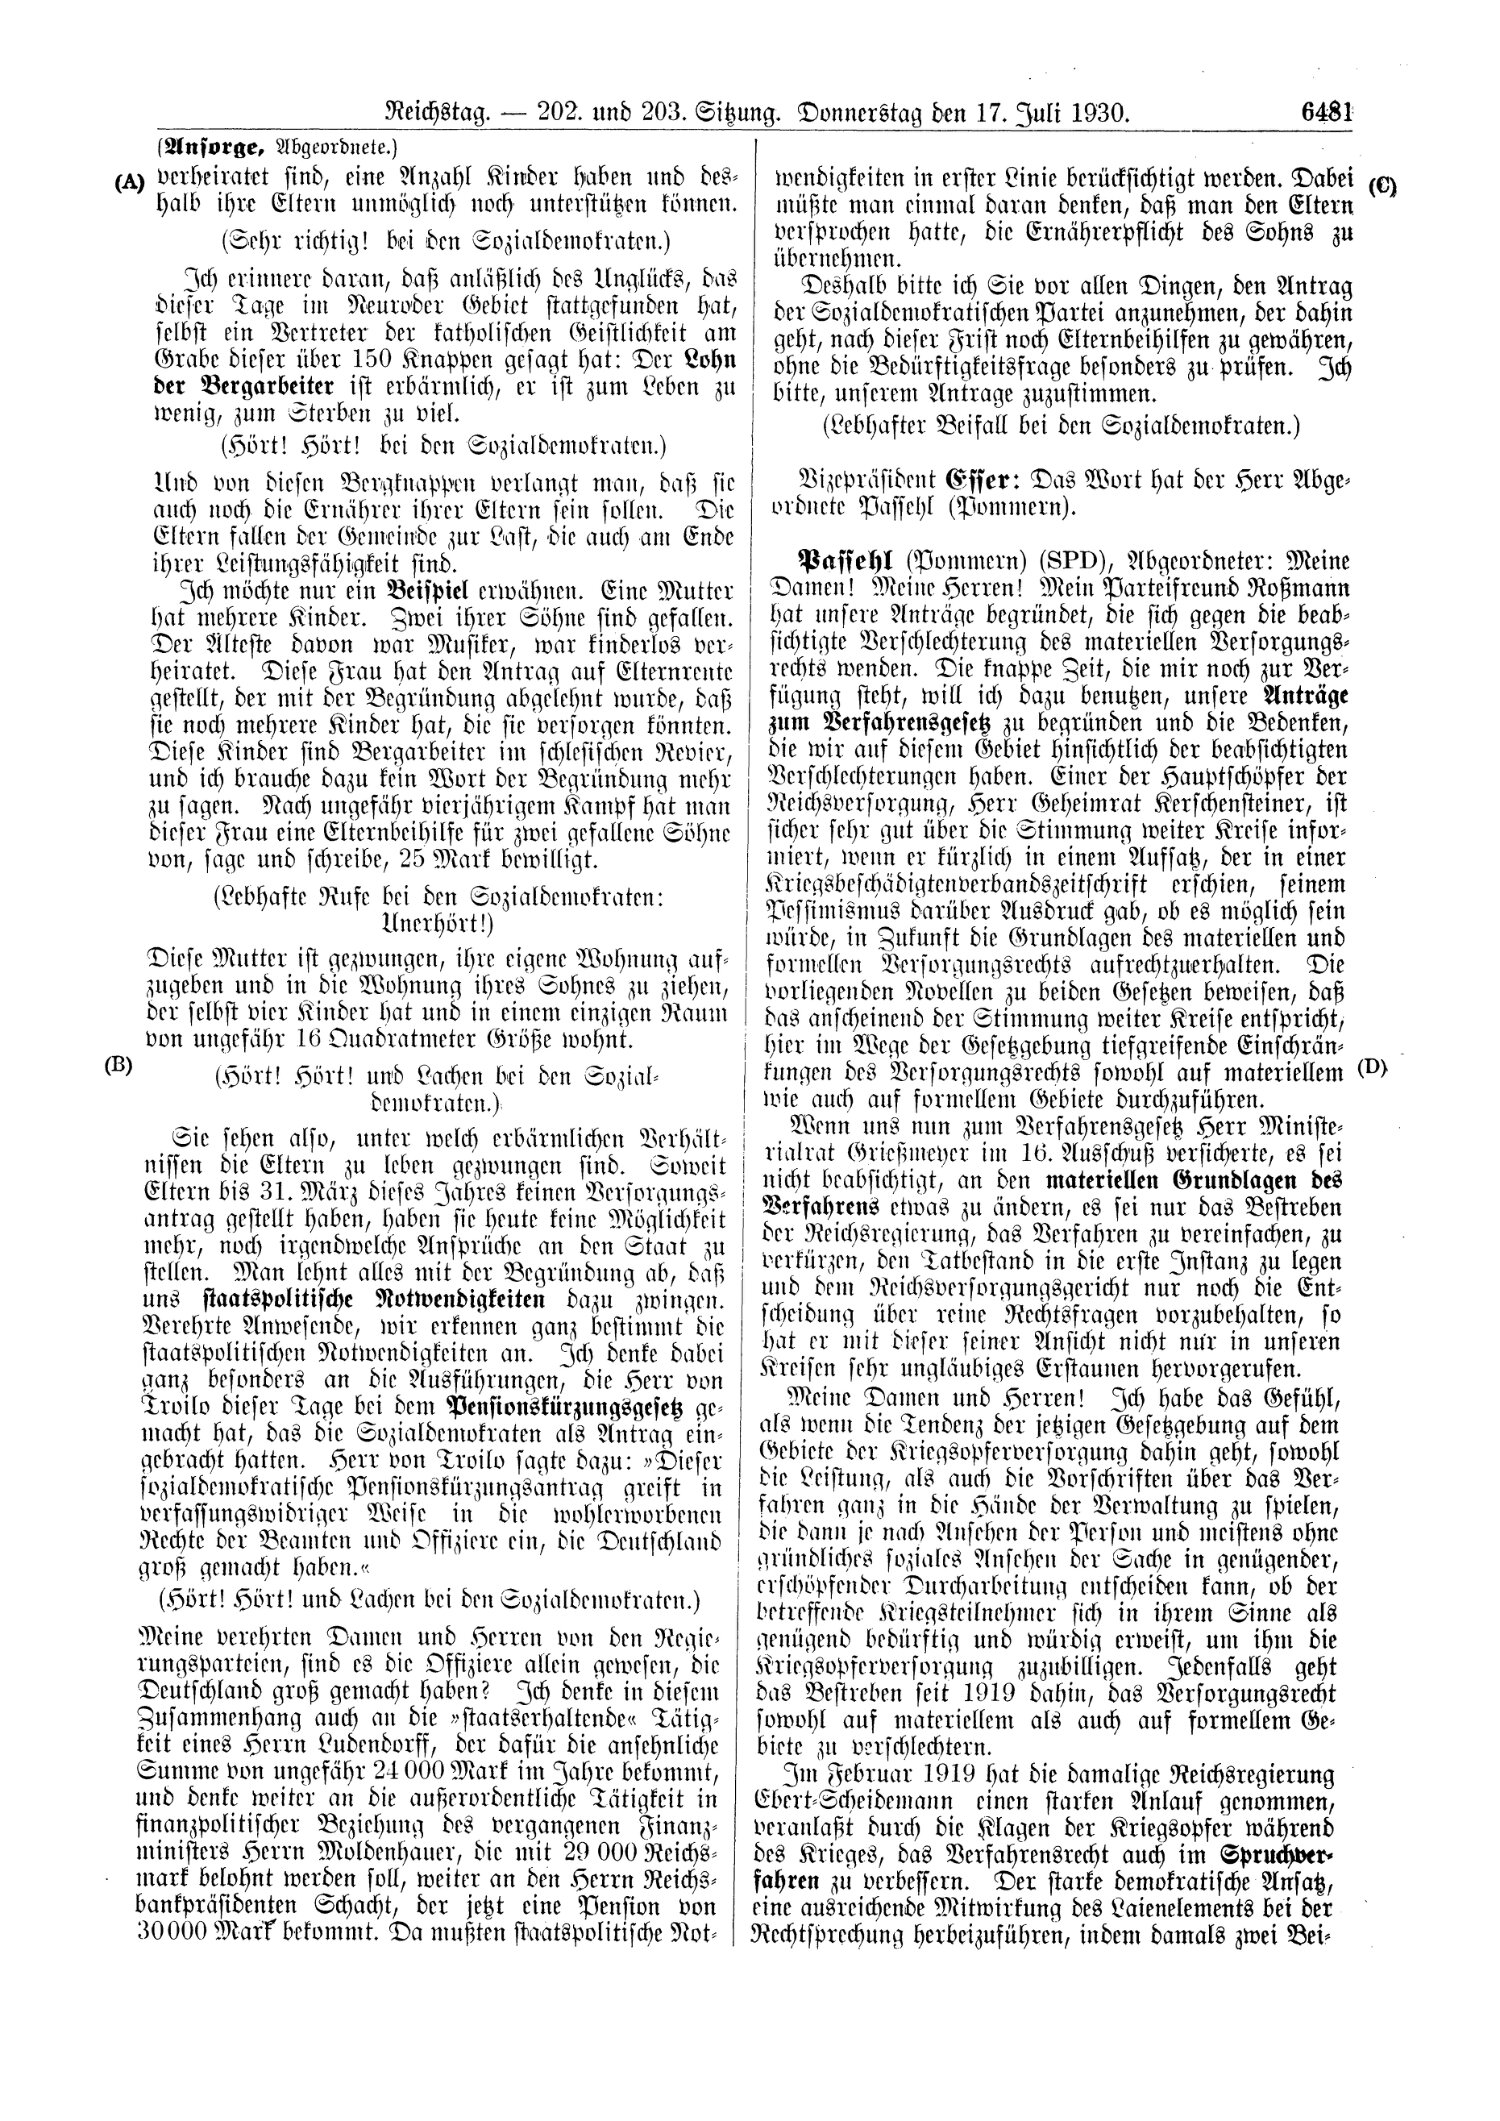 Scan of page 6481